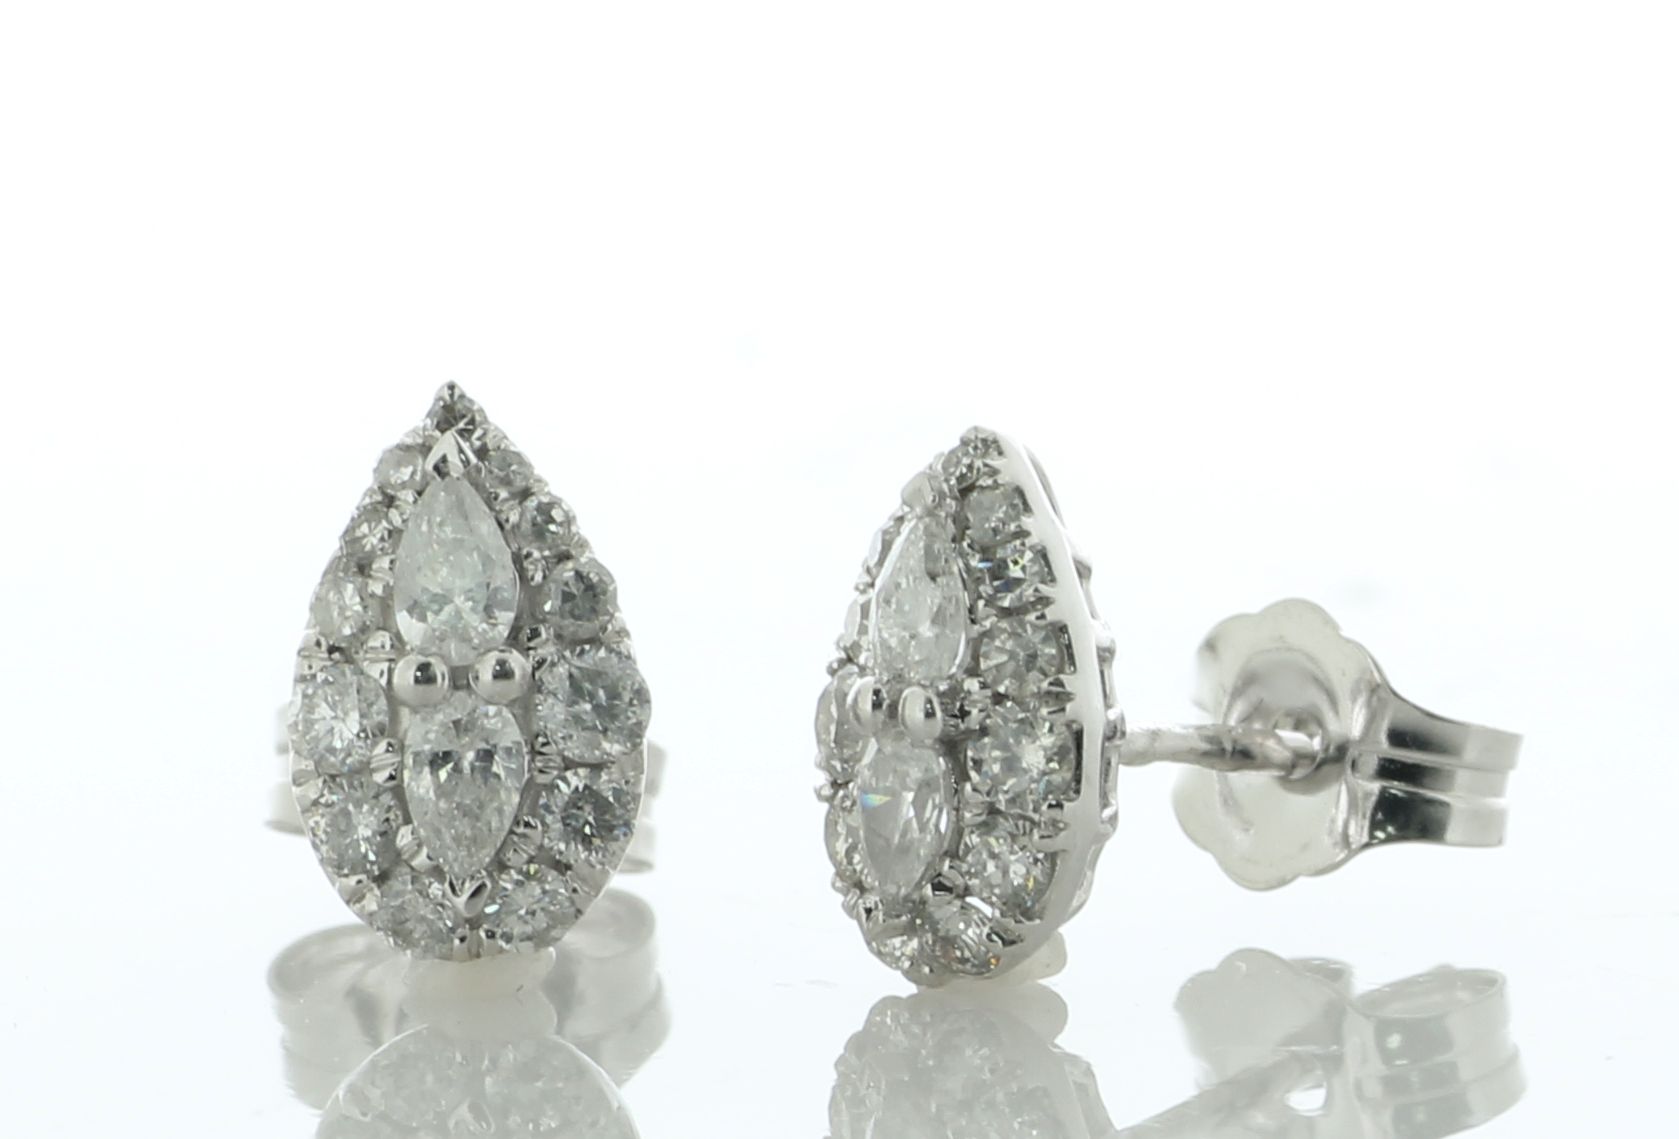 9ct White Gold Pear Shaped Cluster Diamond Stud Earring 0.40 Carats - Image 3 of 5